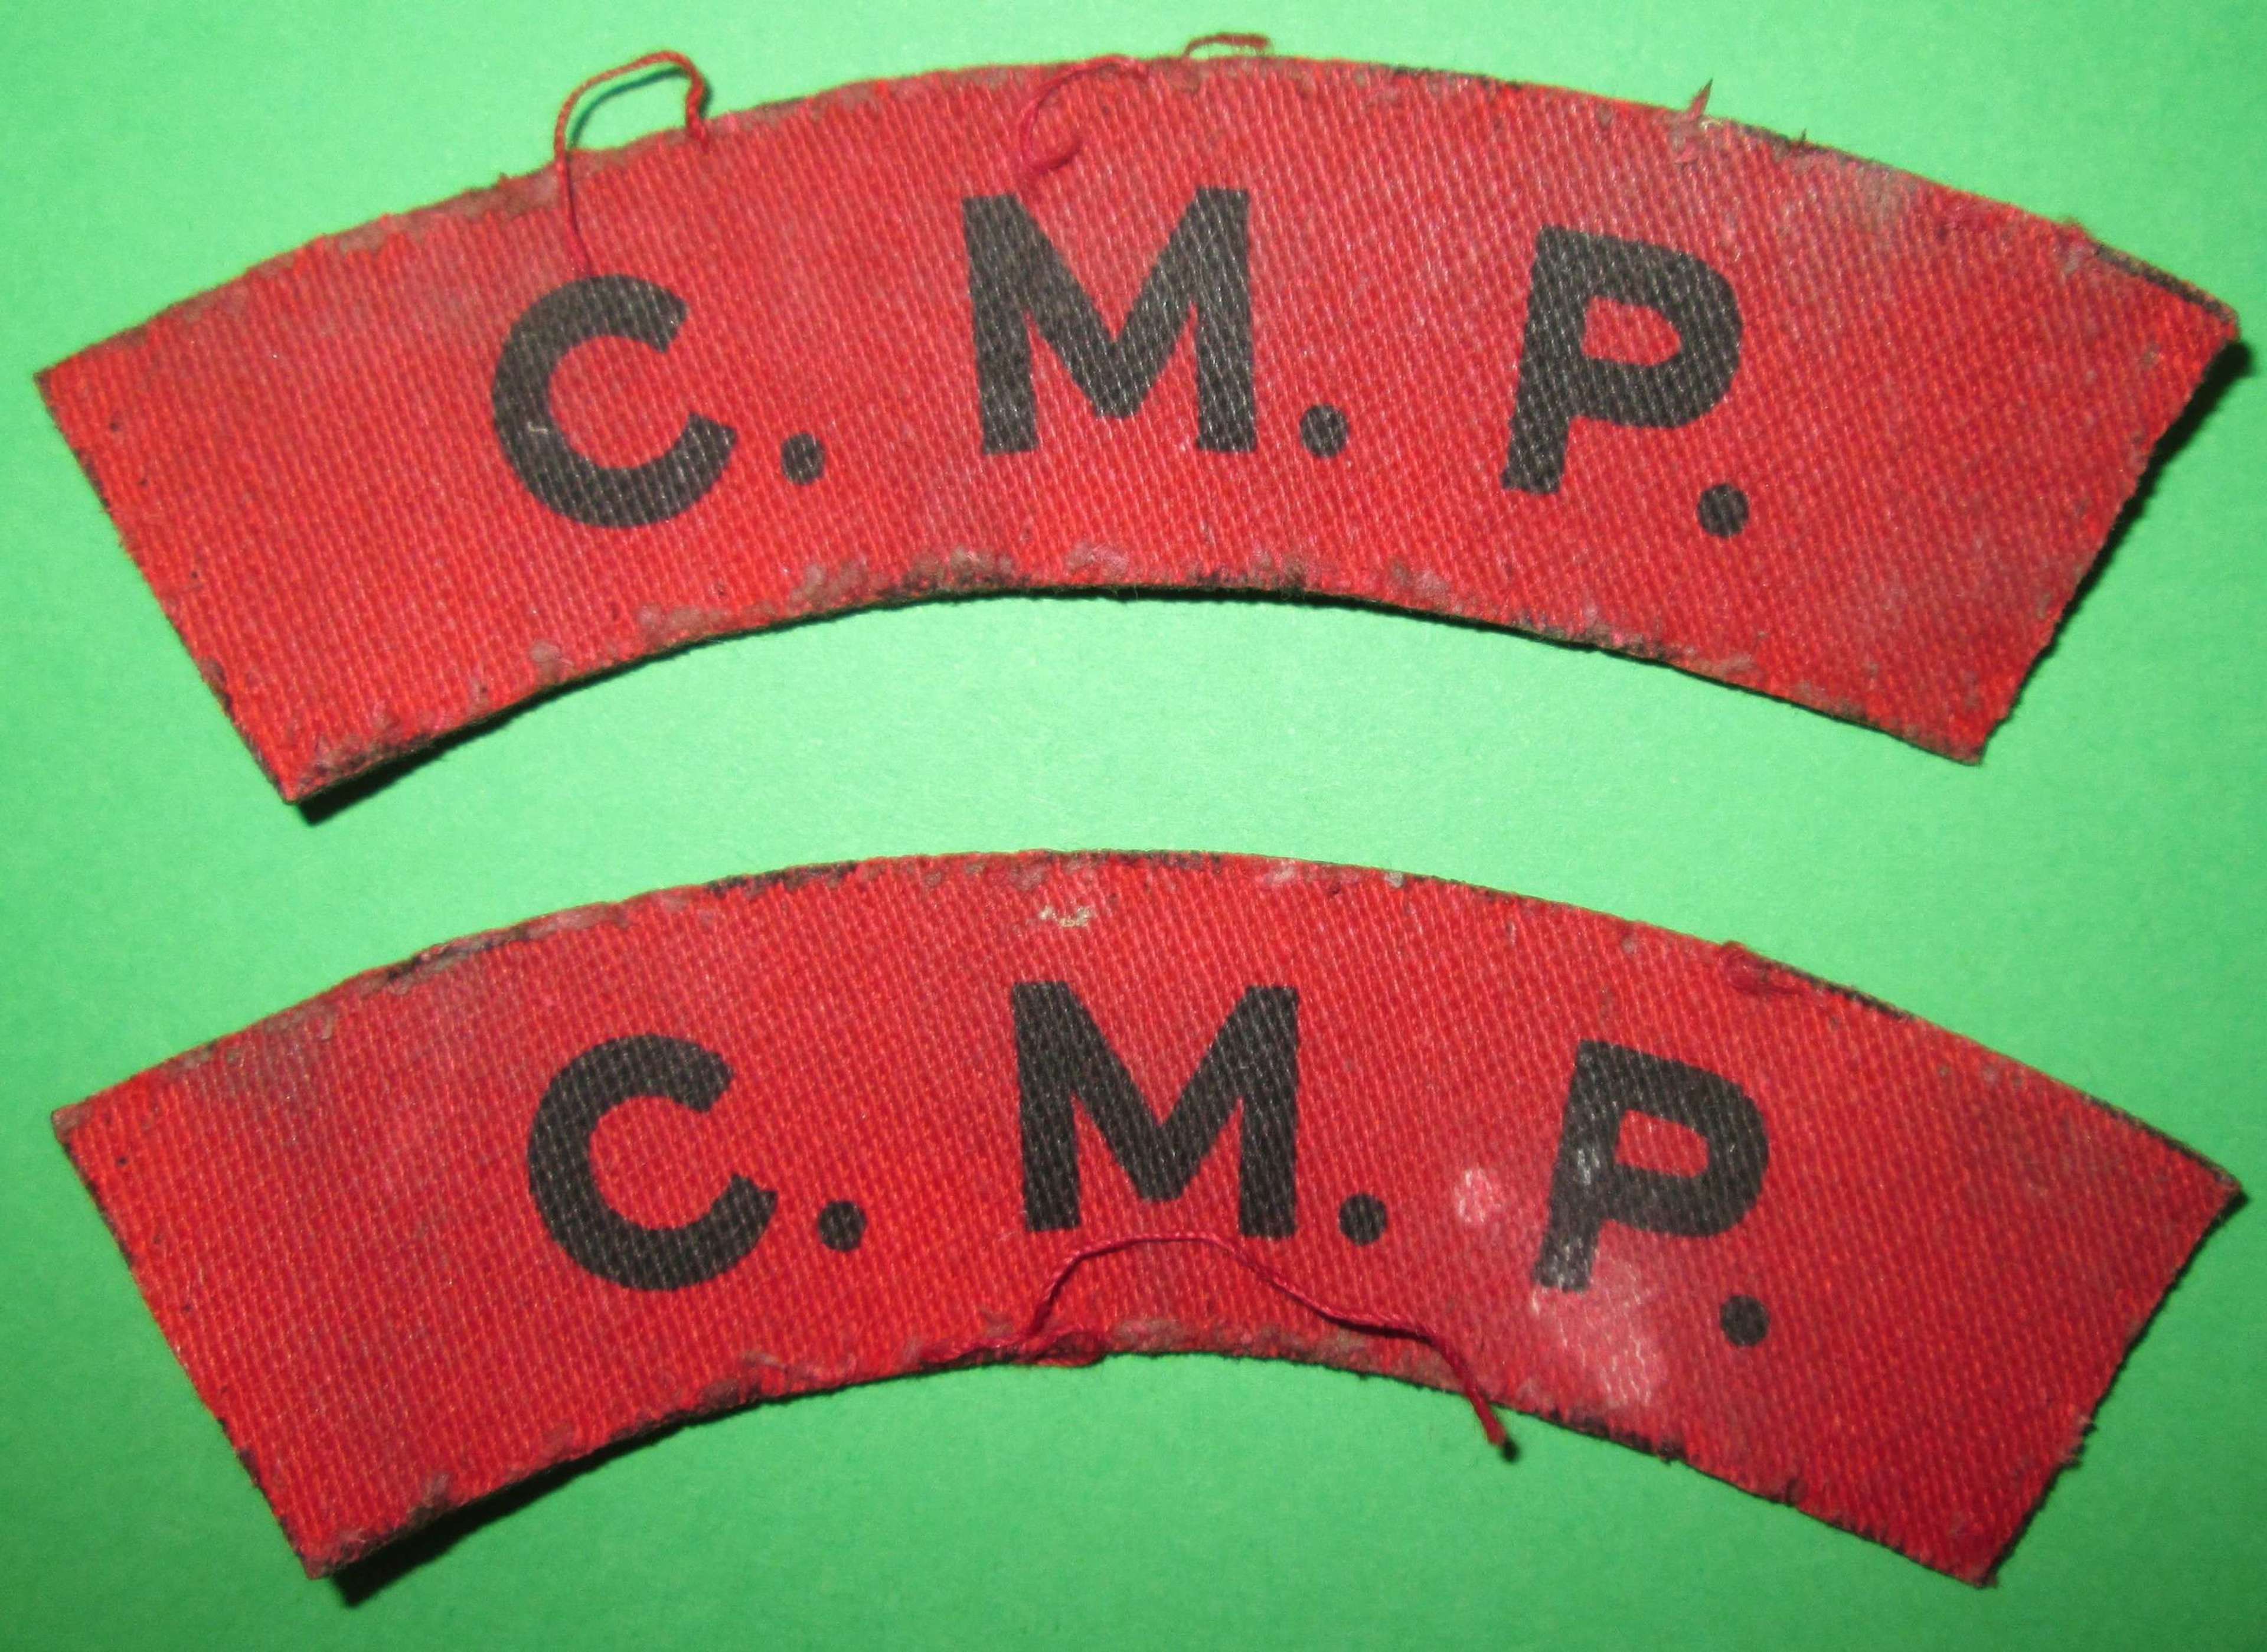 A PAIR OF PRINTED CORPS OF MILLITARY POLICE SHOULDER TITLES